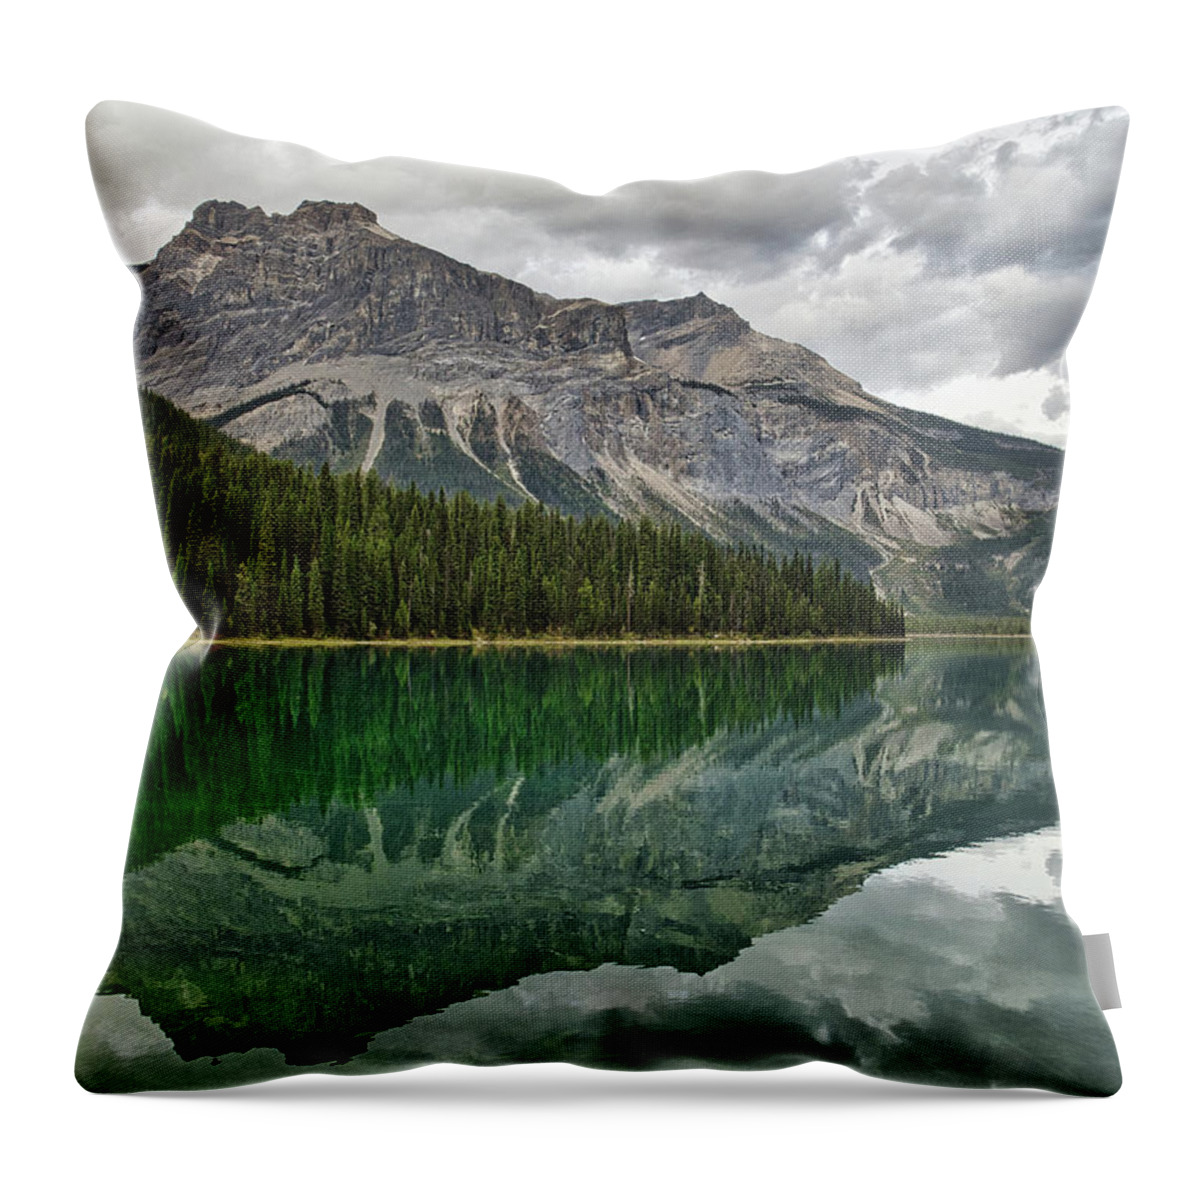 Landscape Throw Pillow featuring the photograph Michel Peak Reflection by Allan Van Gasbeck